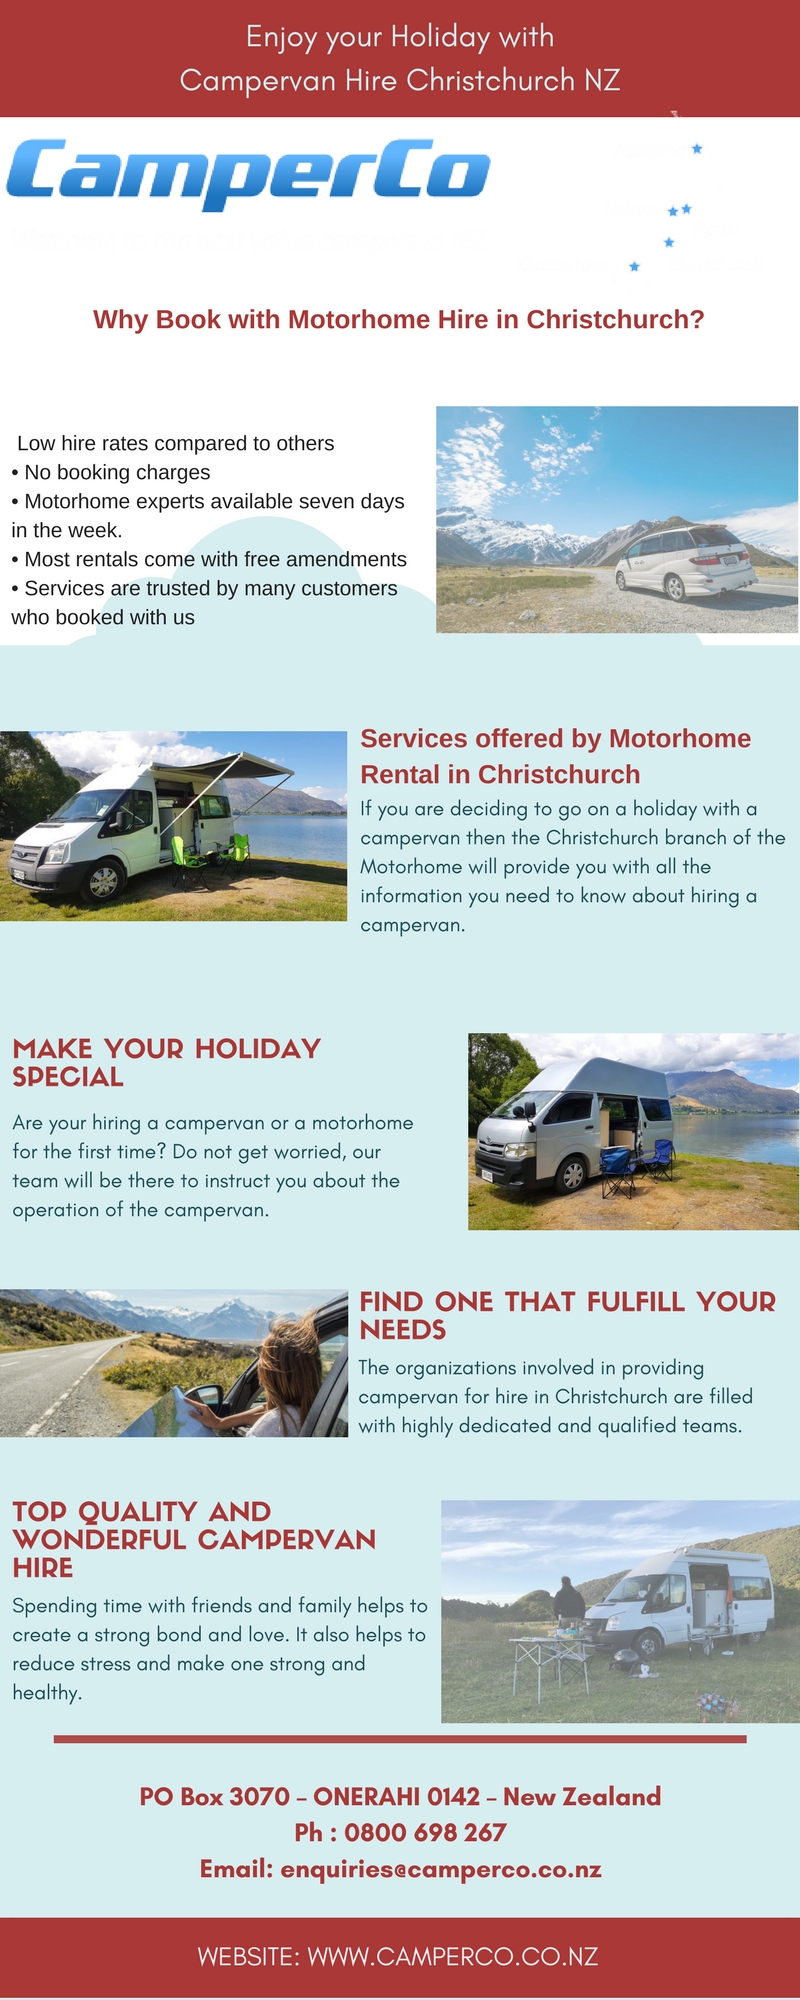 Queenstown Campervan Hire Camperco offers its fleet of campervans, motorhomes and recreational vehicles like Toyota Estima, Hiace and Big Bertha for 2-6 persons hire in Queensland, NZ. Website:https://www.camperco.co.nz/ by Camperco